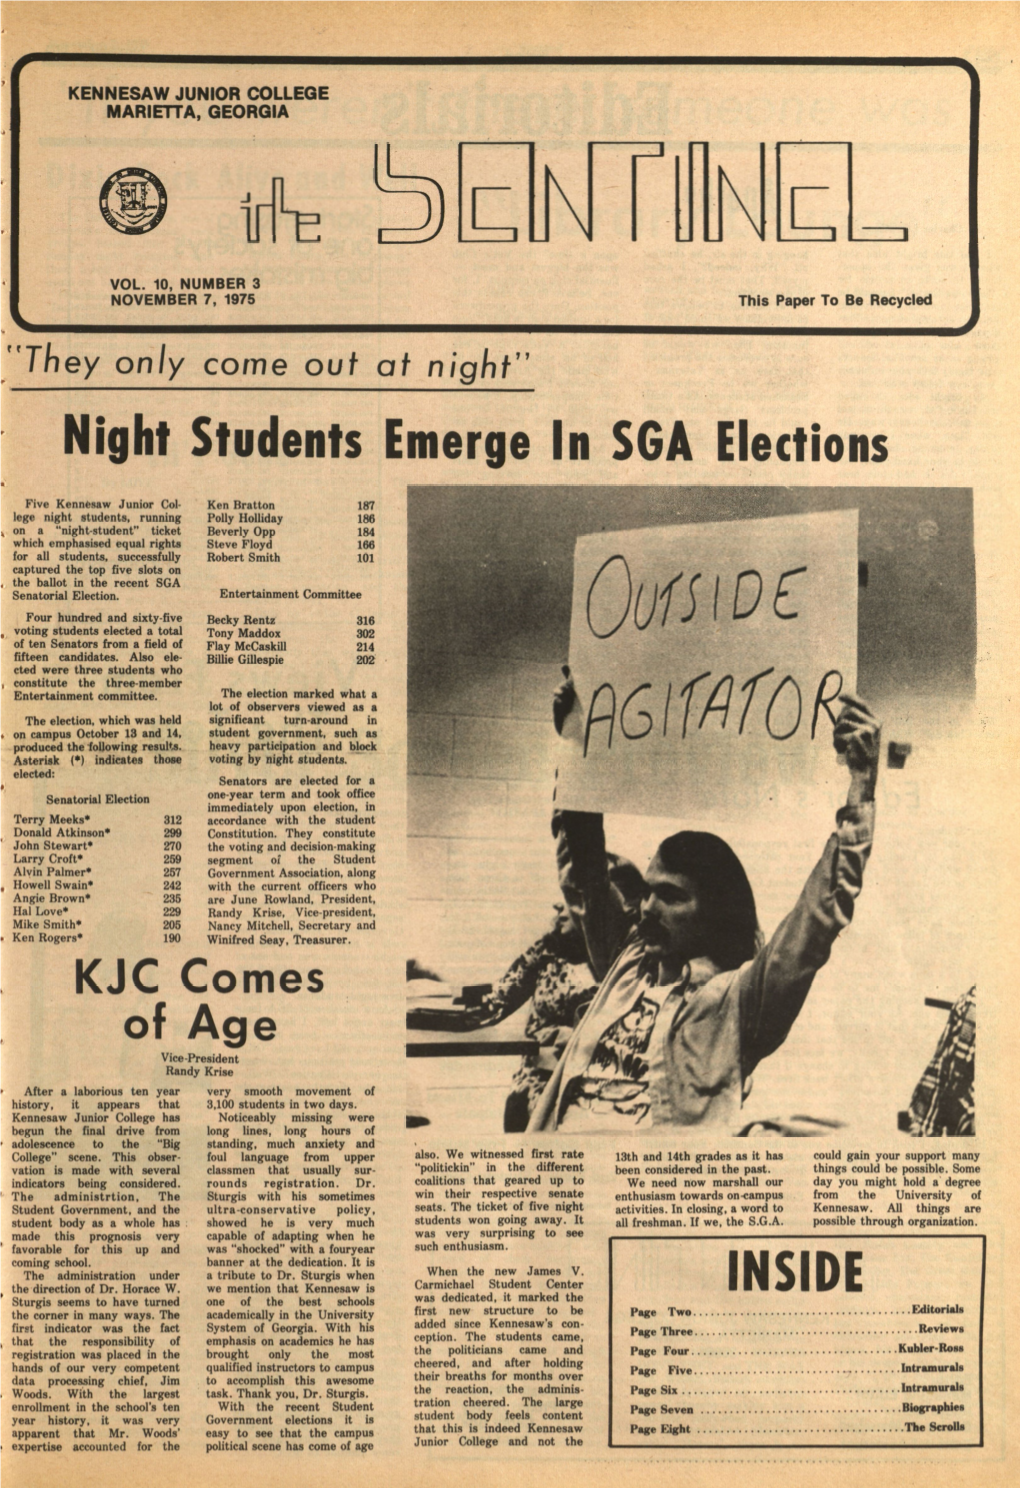 Night Students Emerge in SGA Elections INSIDE